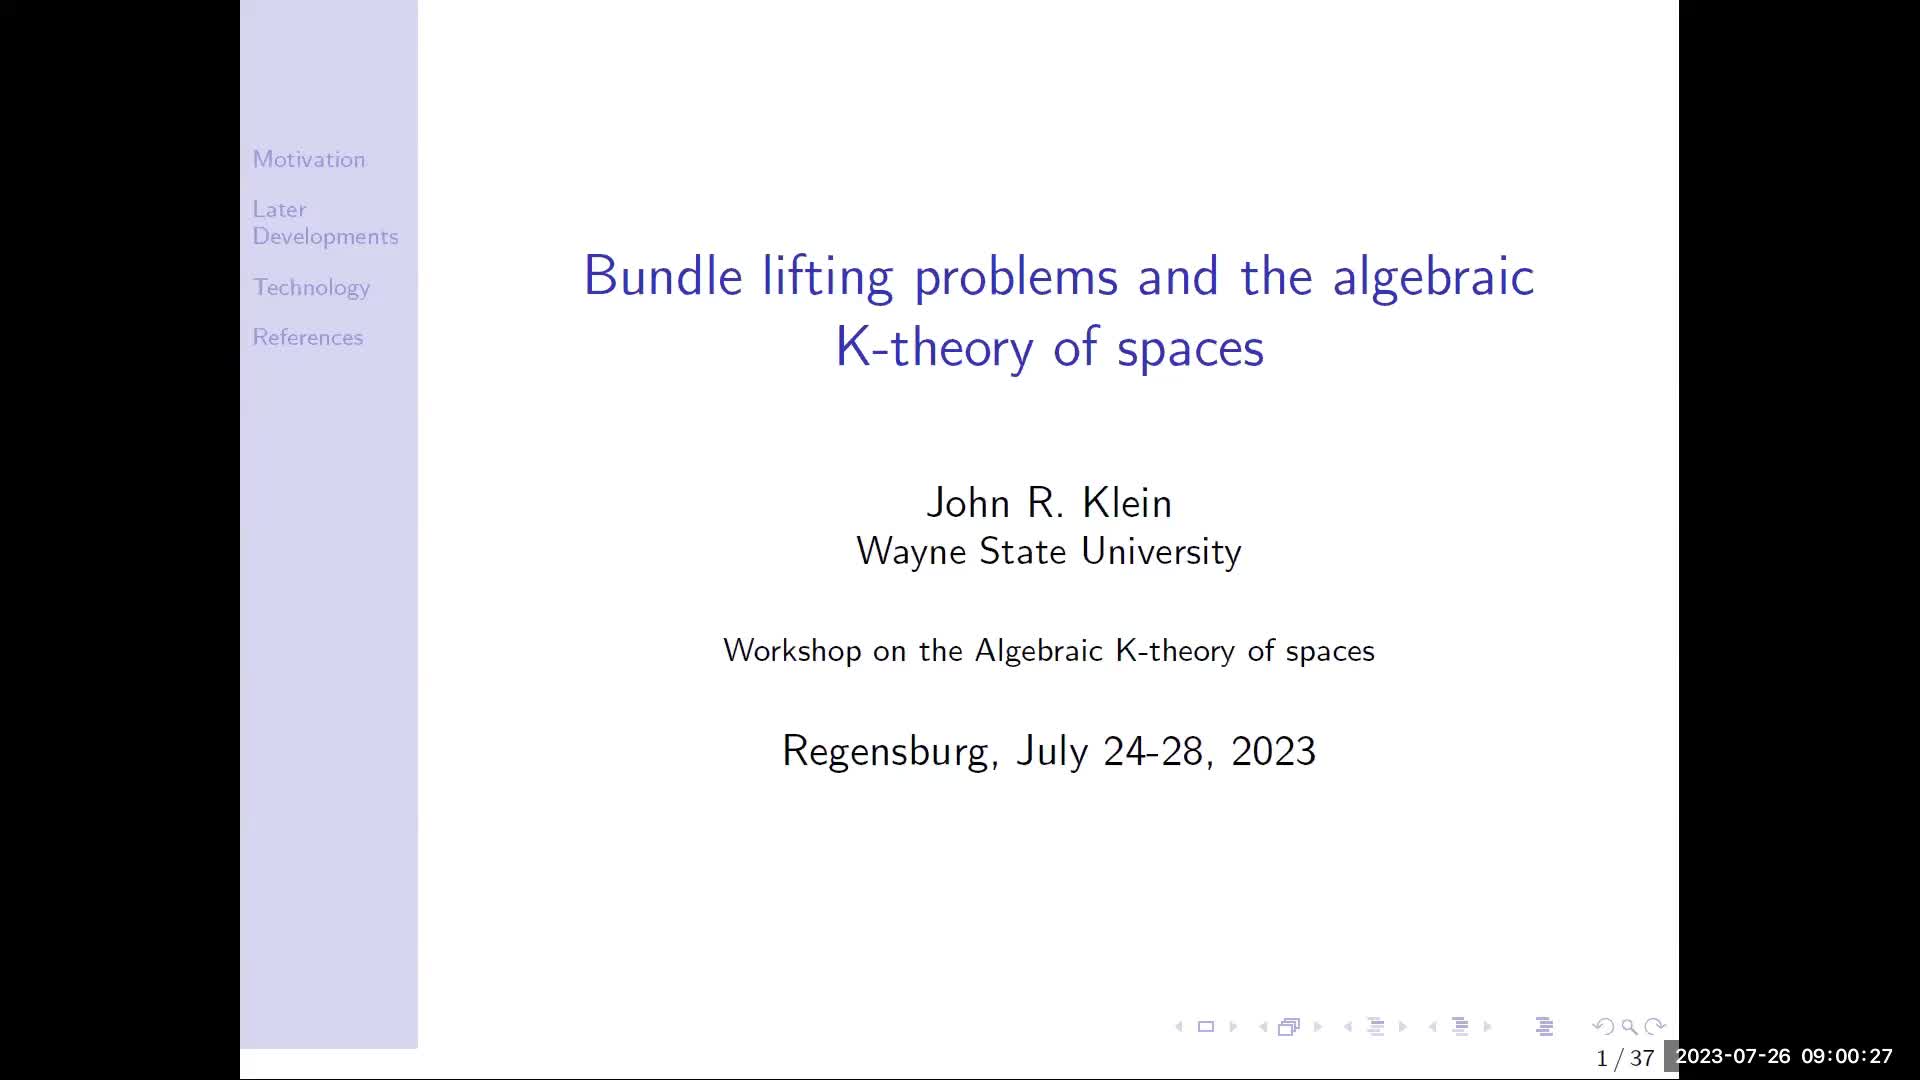 John Klein: Bundle lifting problems and the algebraic K-theory of spaces